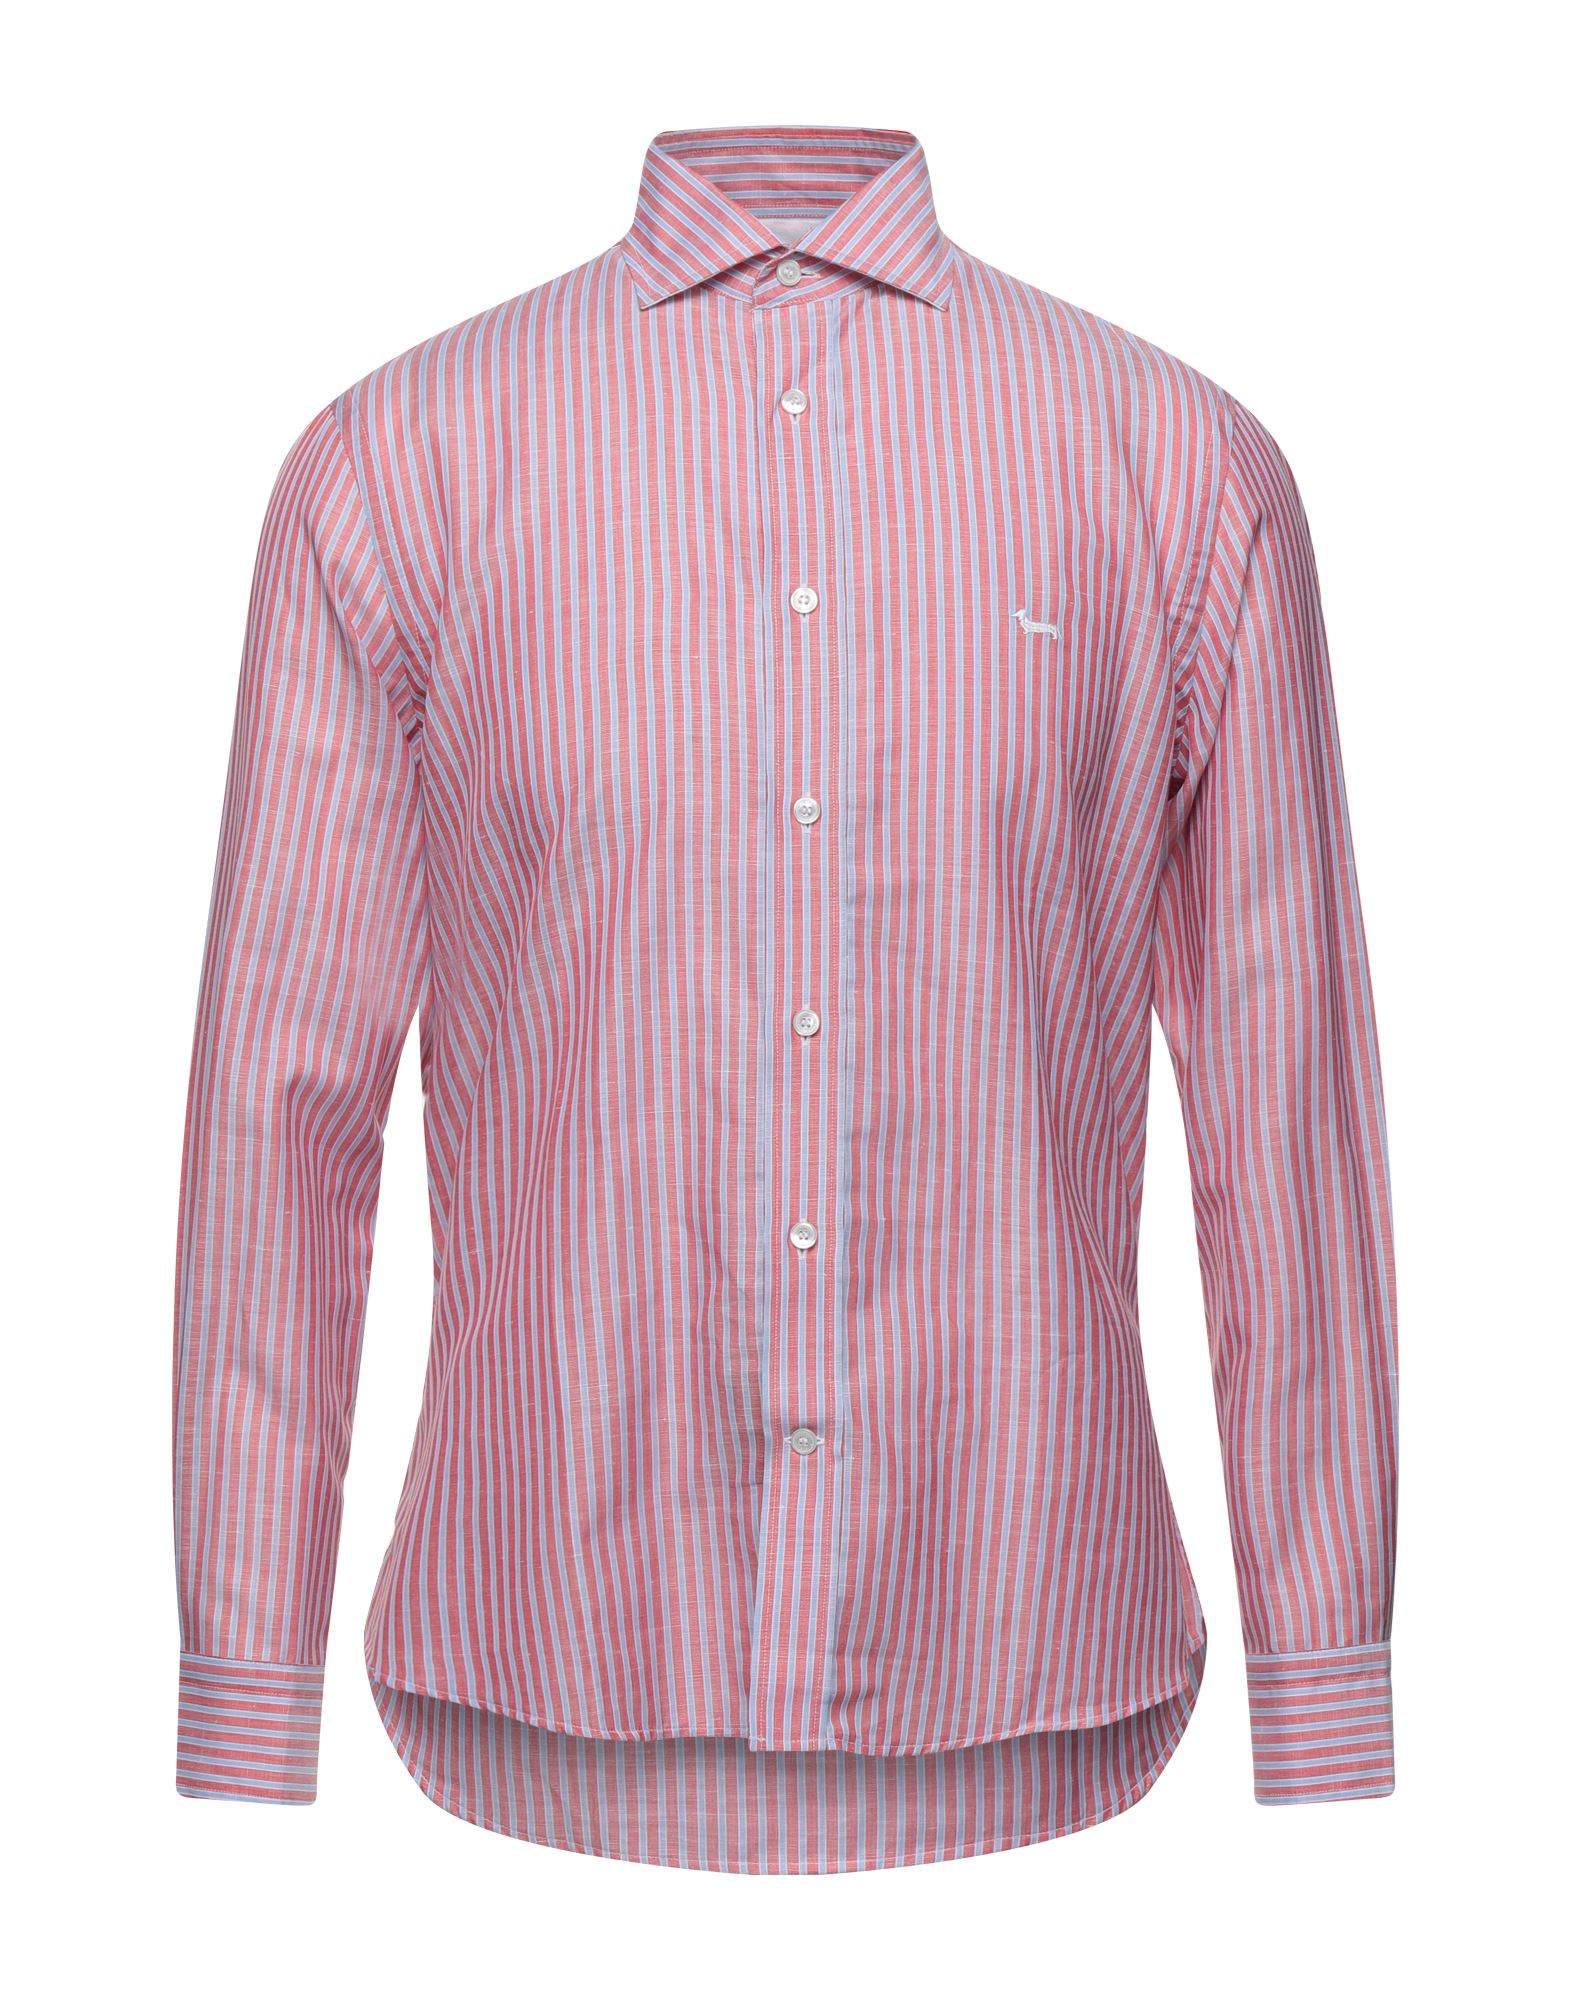 for Men Harmont & Blaine Shirt in Pastel Pink Mens Clothing Shirts Casual shirts and button-up shirts Pink 